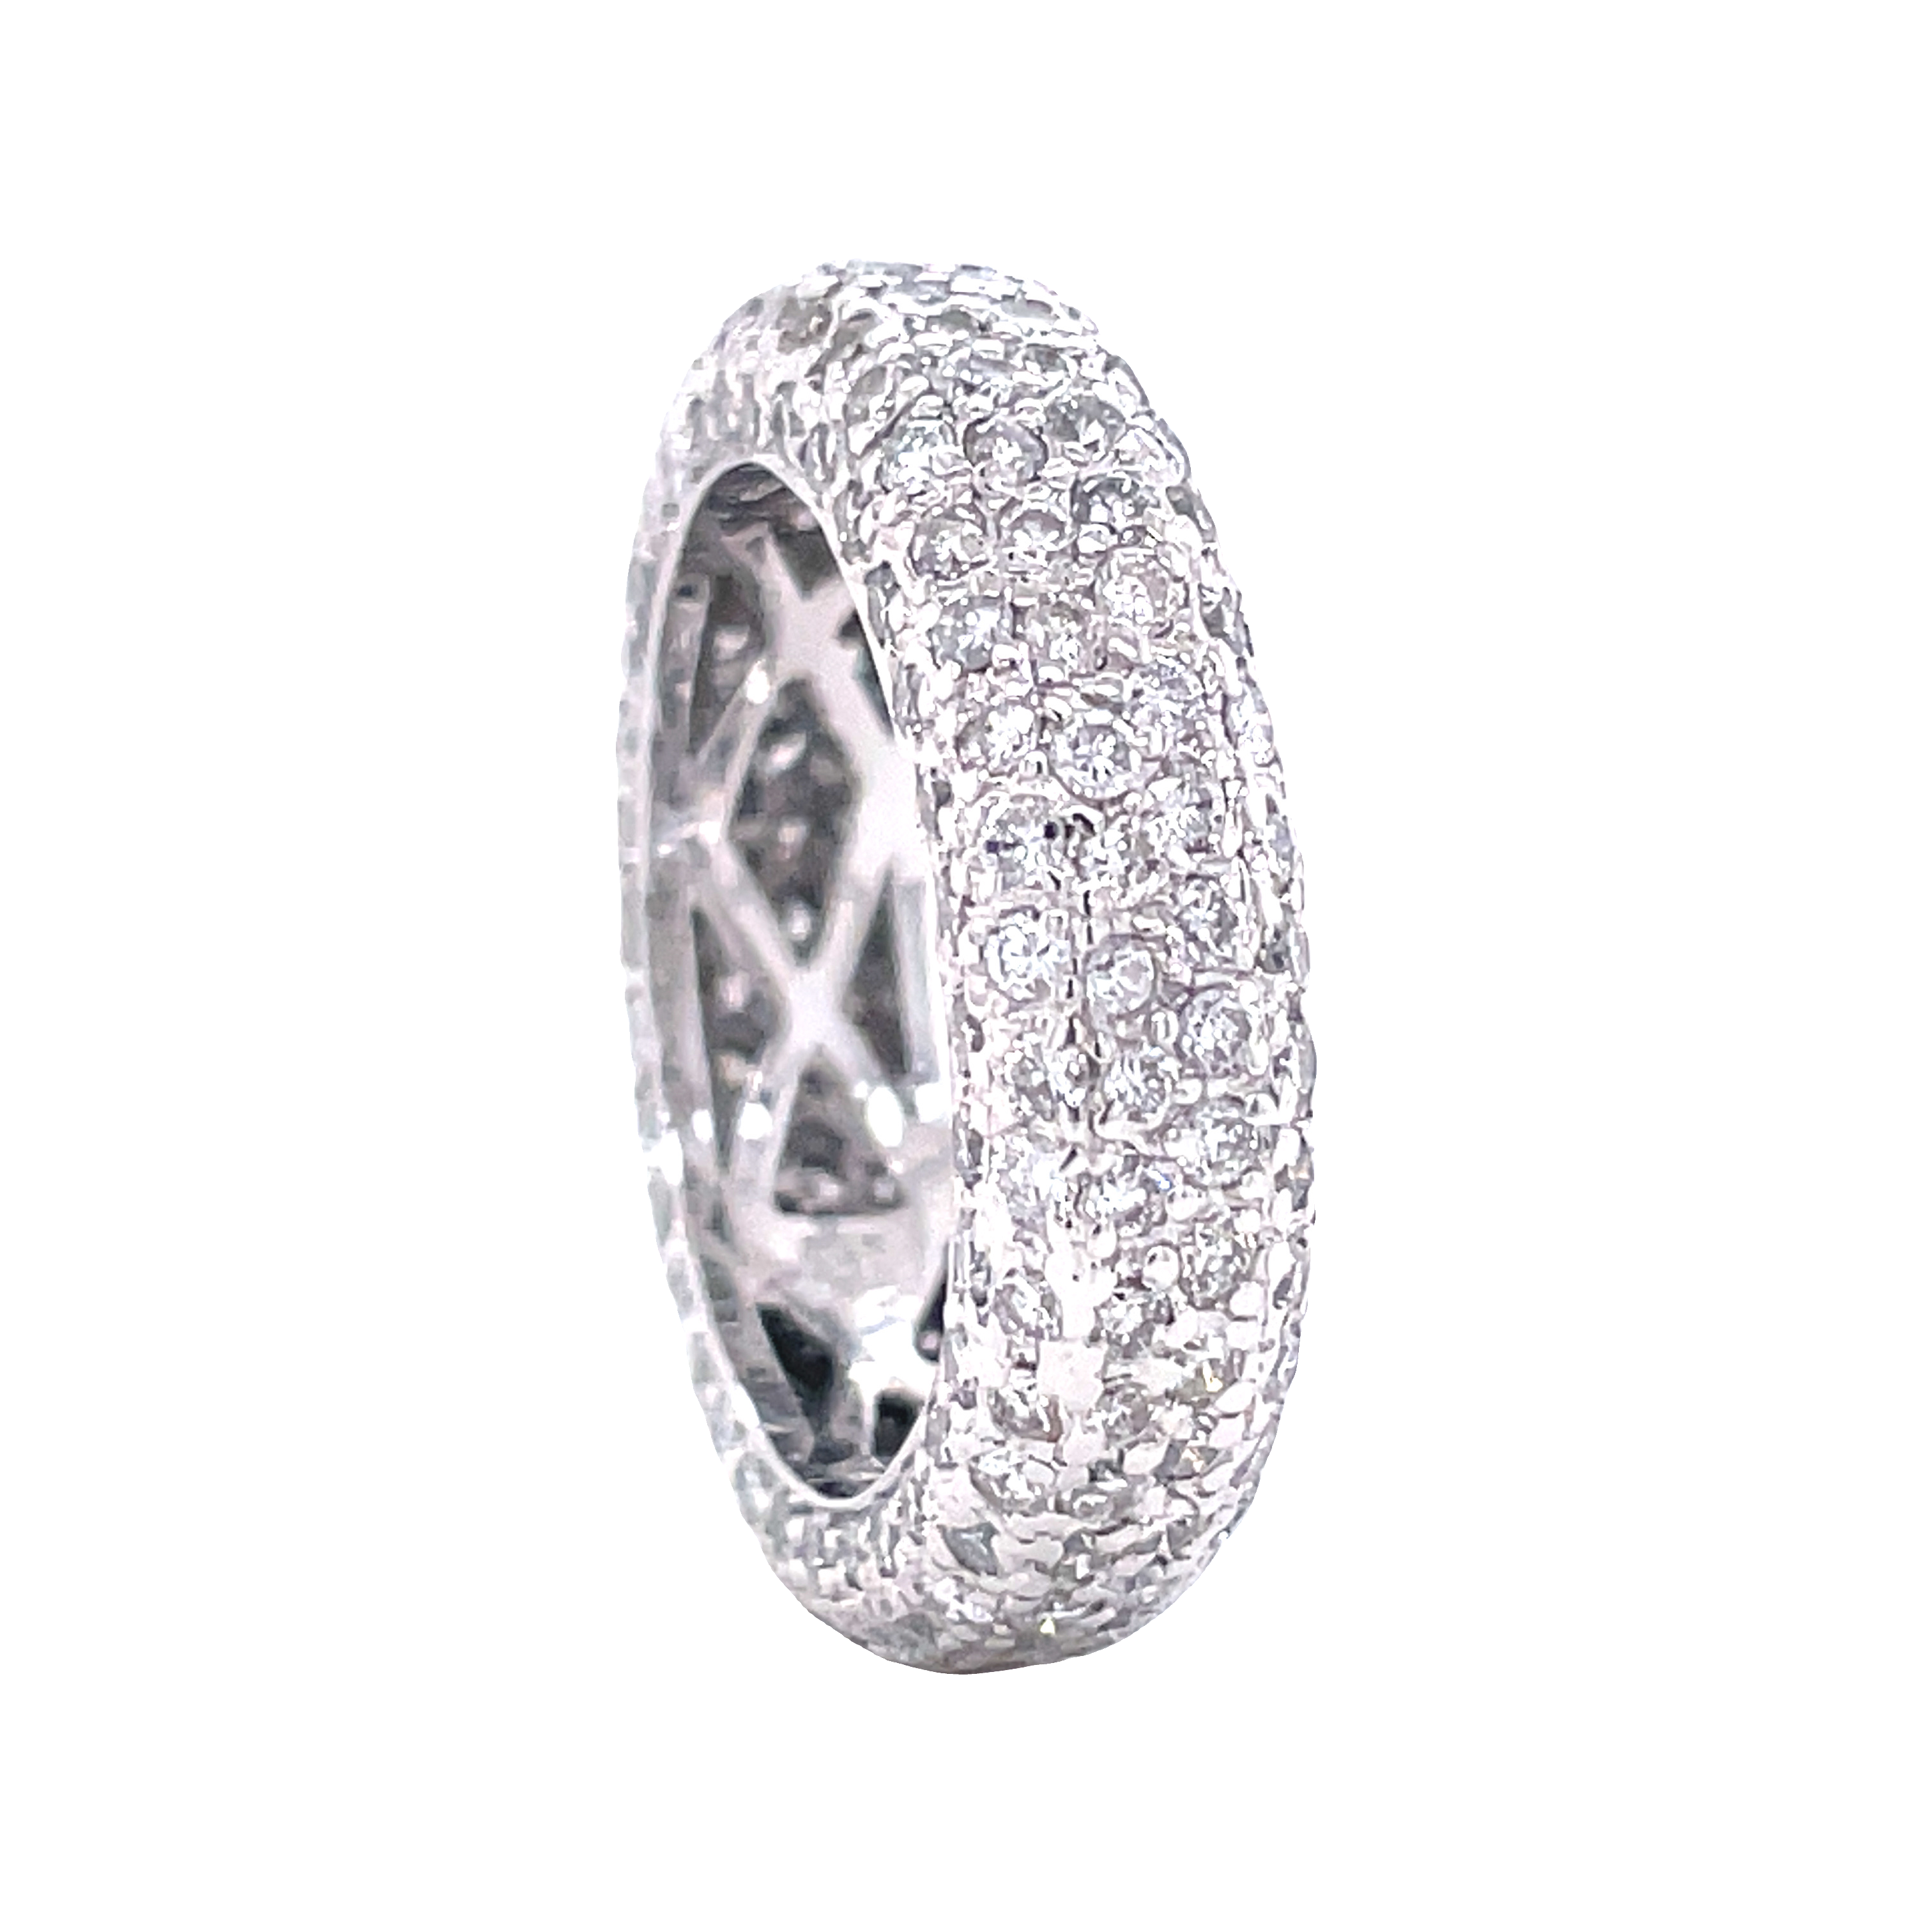 Crafted with the finest materials, this elegant eternity band is set with 4.00 cts of round diamonds fixed in a gallery finish on a 6.00 mm 18k white gold band.